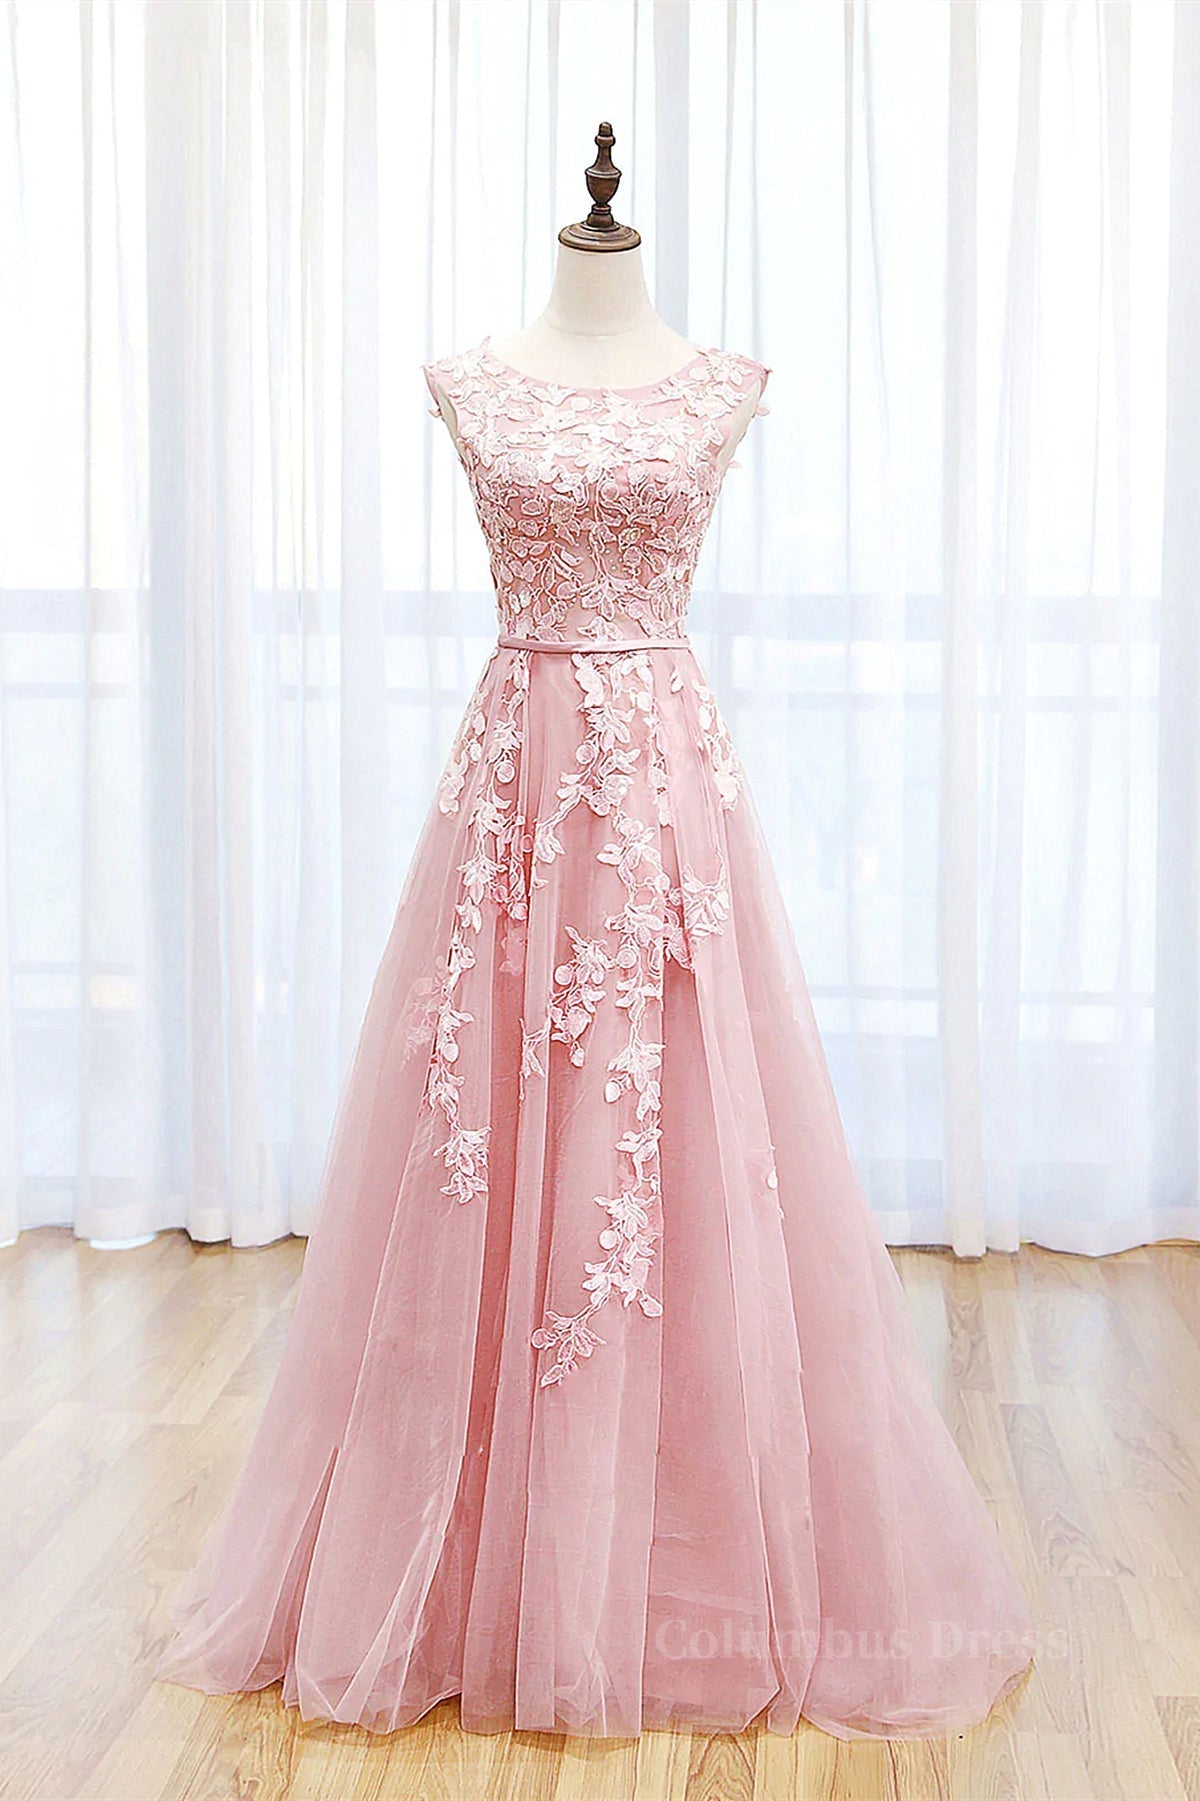 Formal Dresses For Ladies Over 53, Round Neck Pink Lace Prom Dresses, Pink Lace Long Formal Evening Dresses